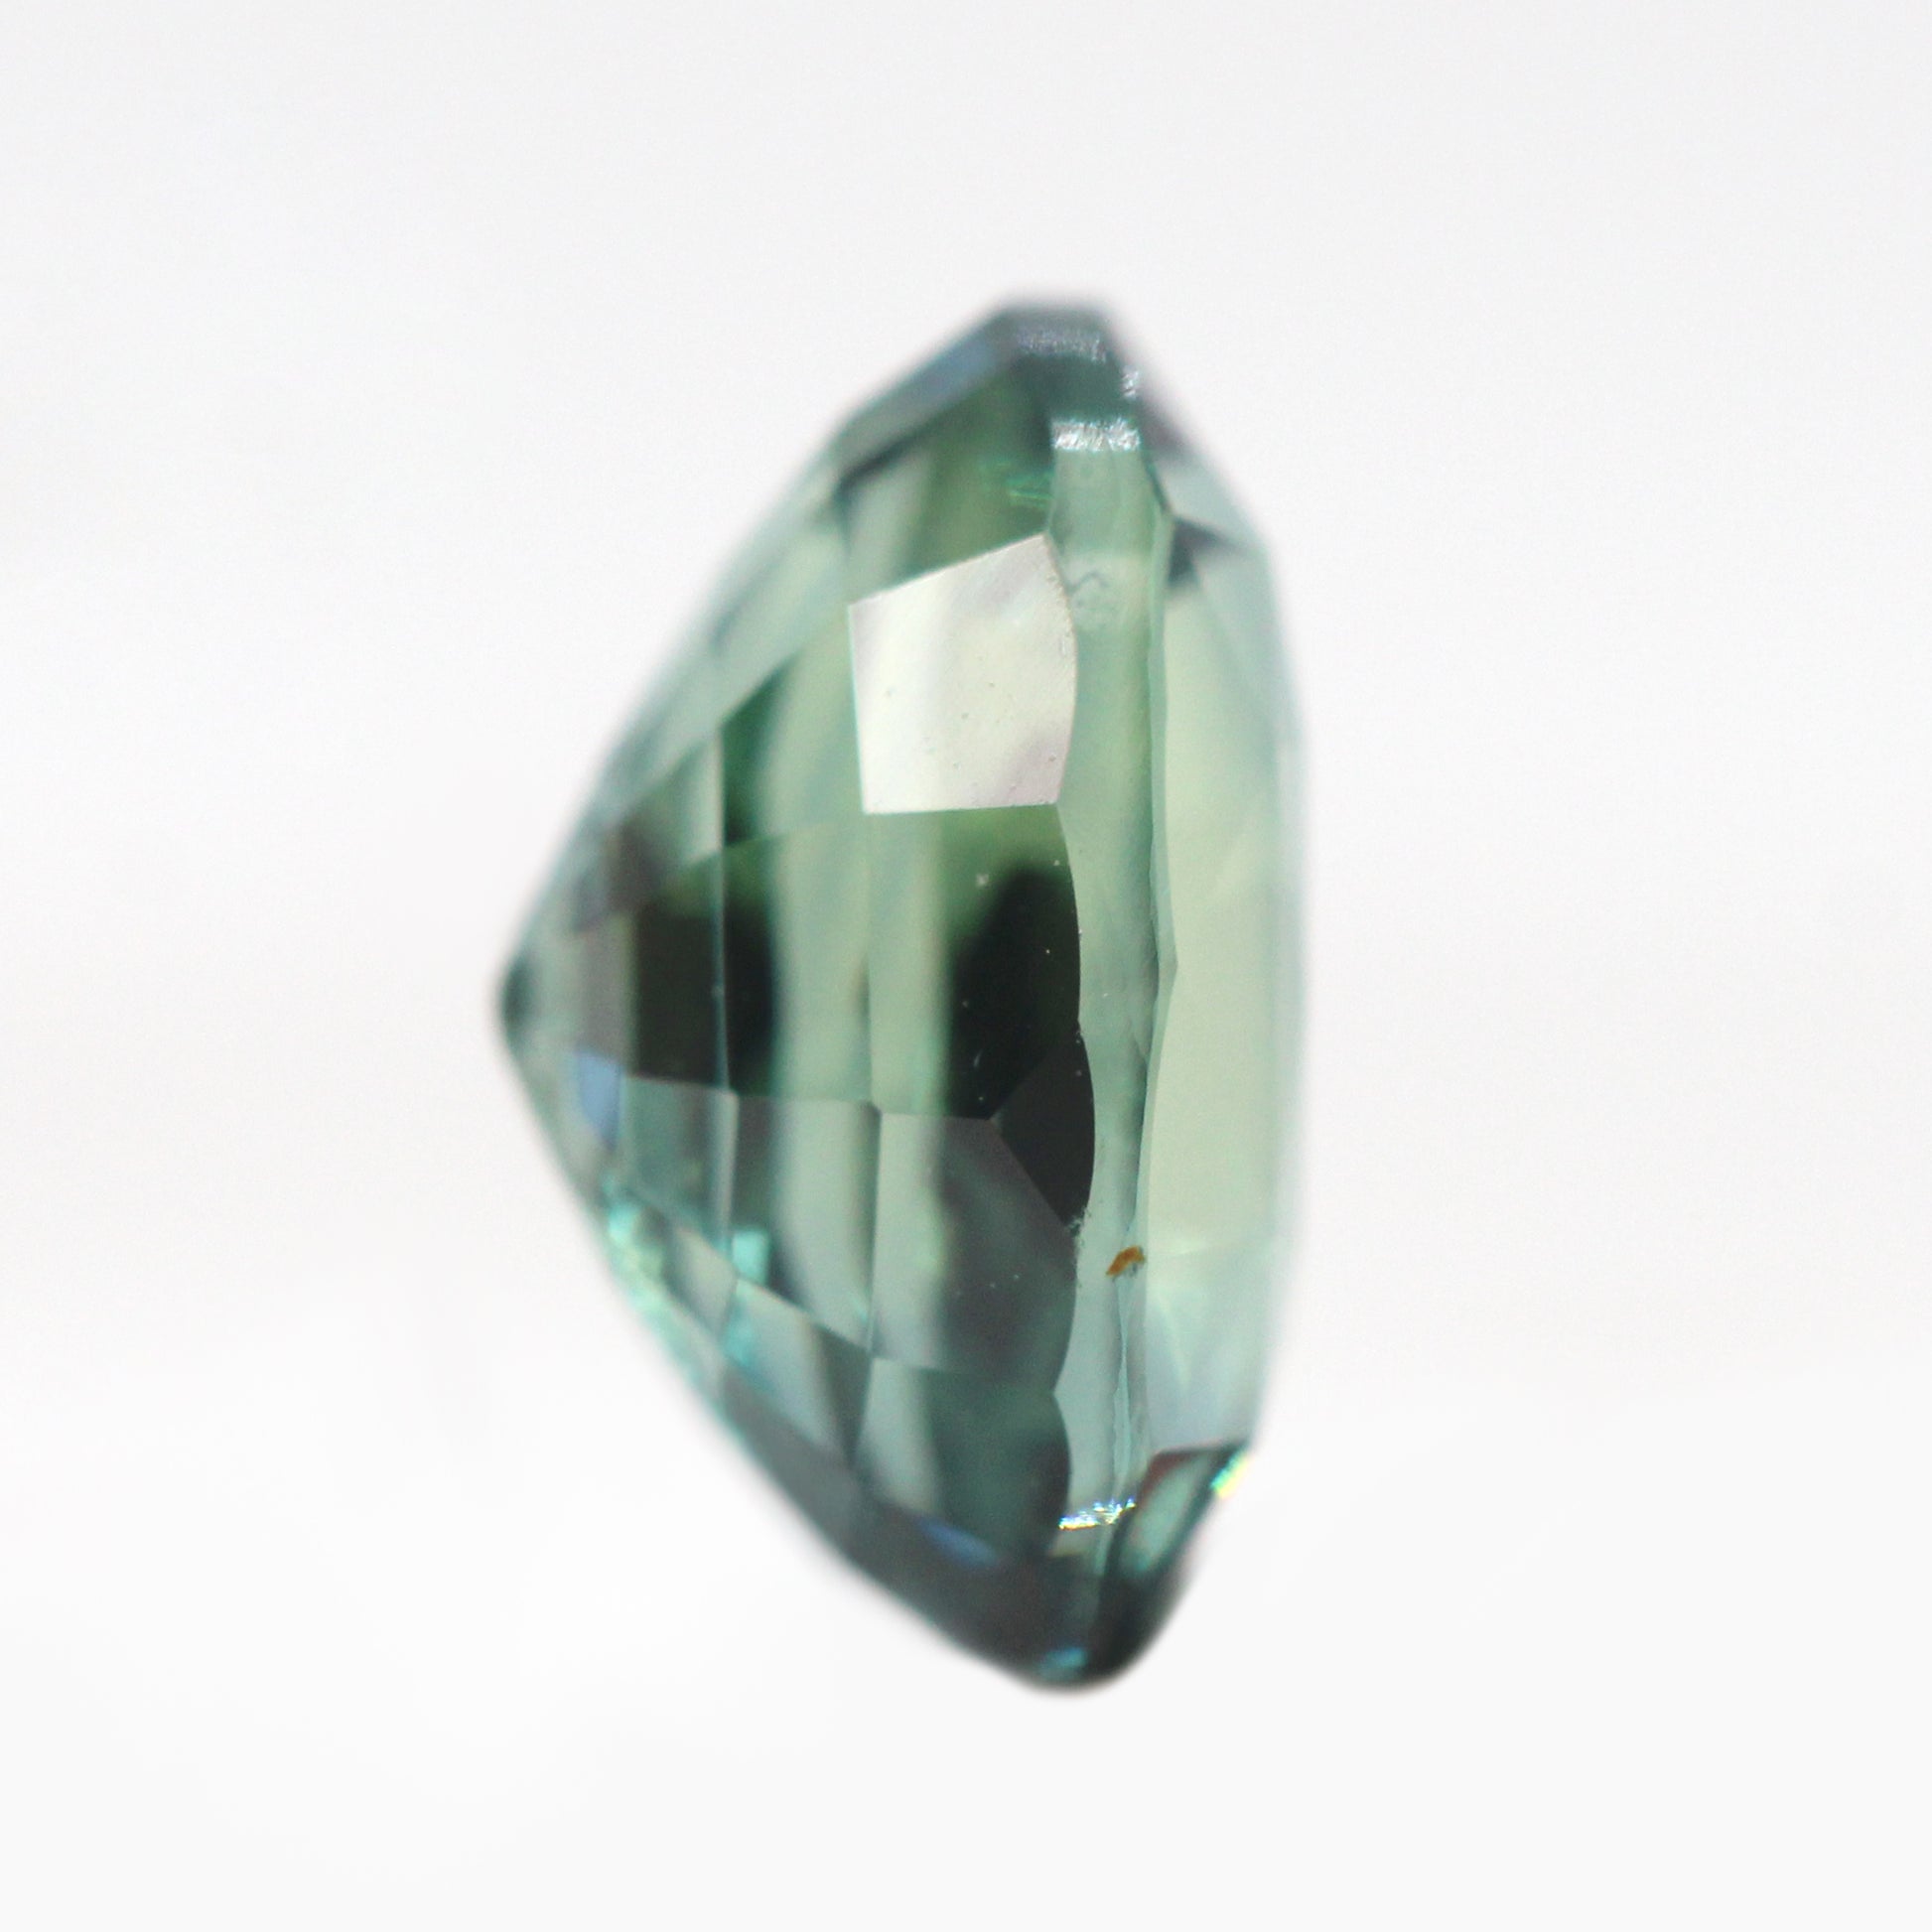 2.01 Carat Bi-Color Green Blue Oval Sapphire for Custom Work - Inventory Code BGOS201 - Midwinter Co. Alternative Bridal Rings and Modern Fine Jewelry